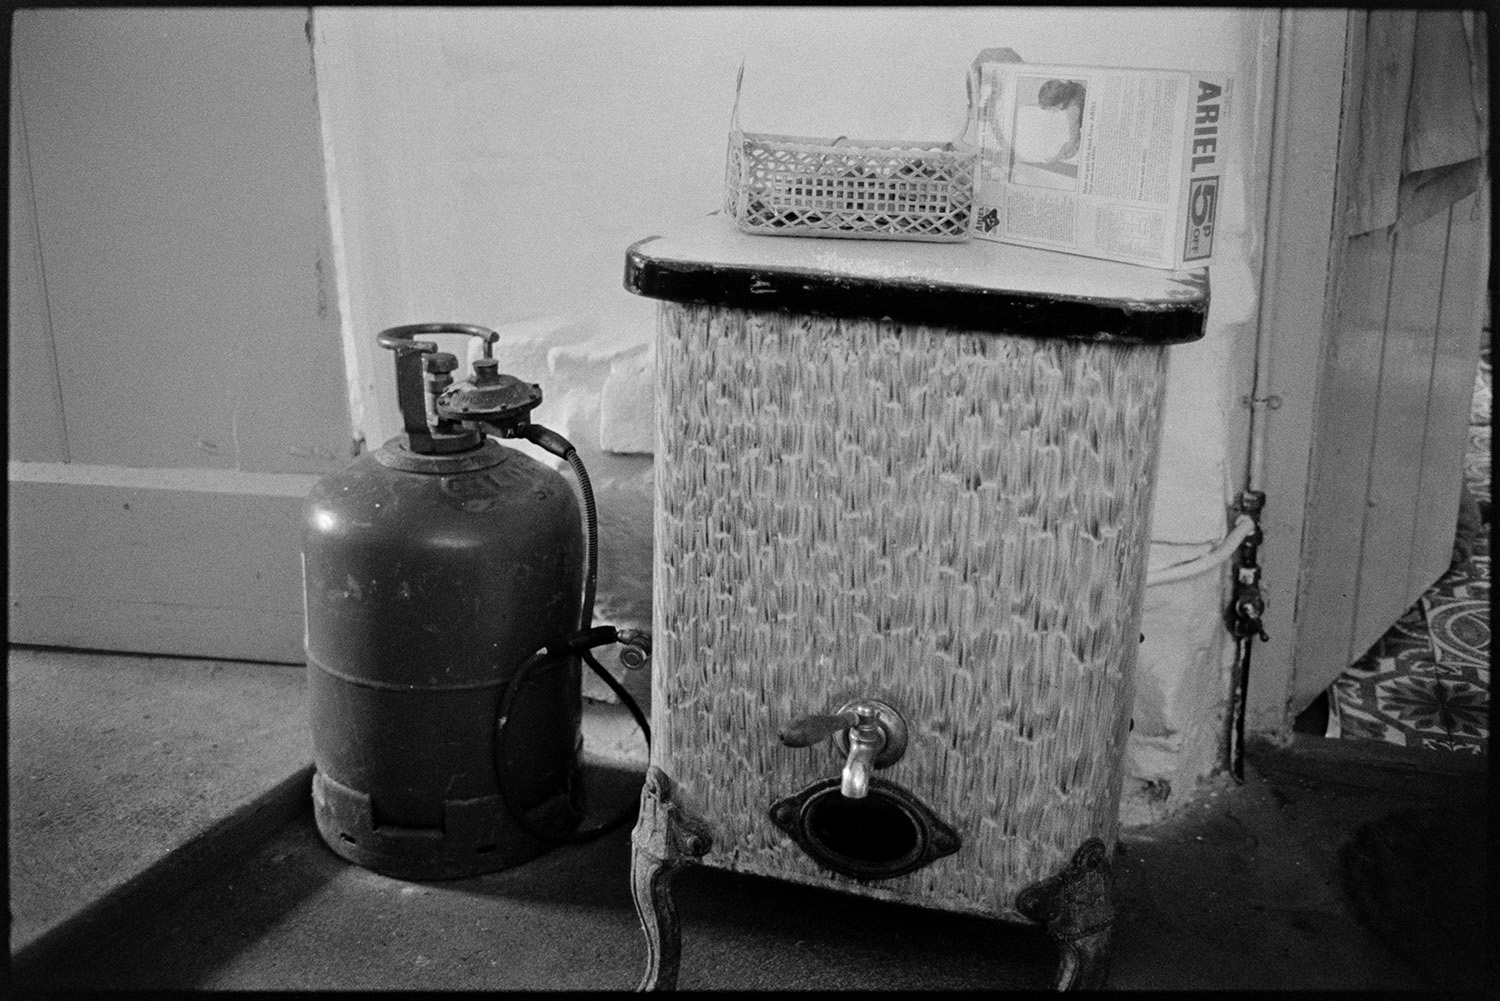 Gas boiler for water with cylinder. 
[A gas cylinder and gas boiler for hot water in a house, possibly Emily Easterbrook's home, in West Lane, Dolton.]